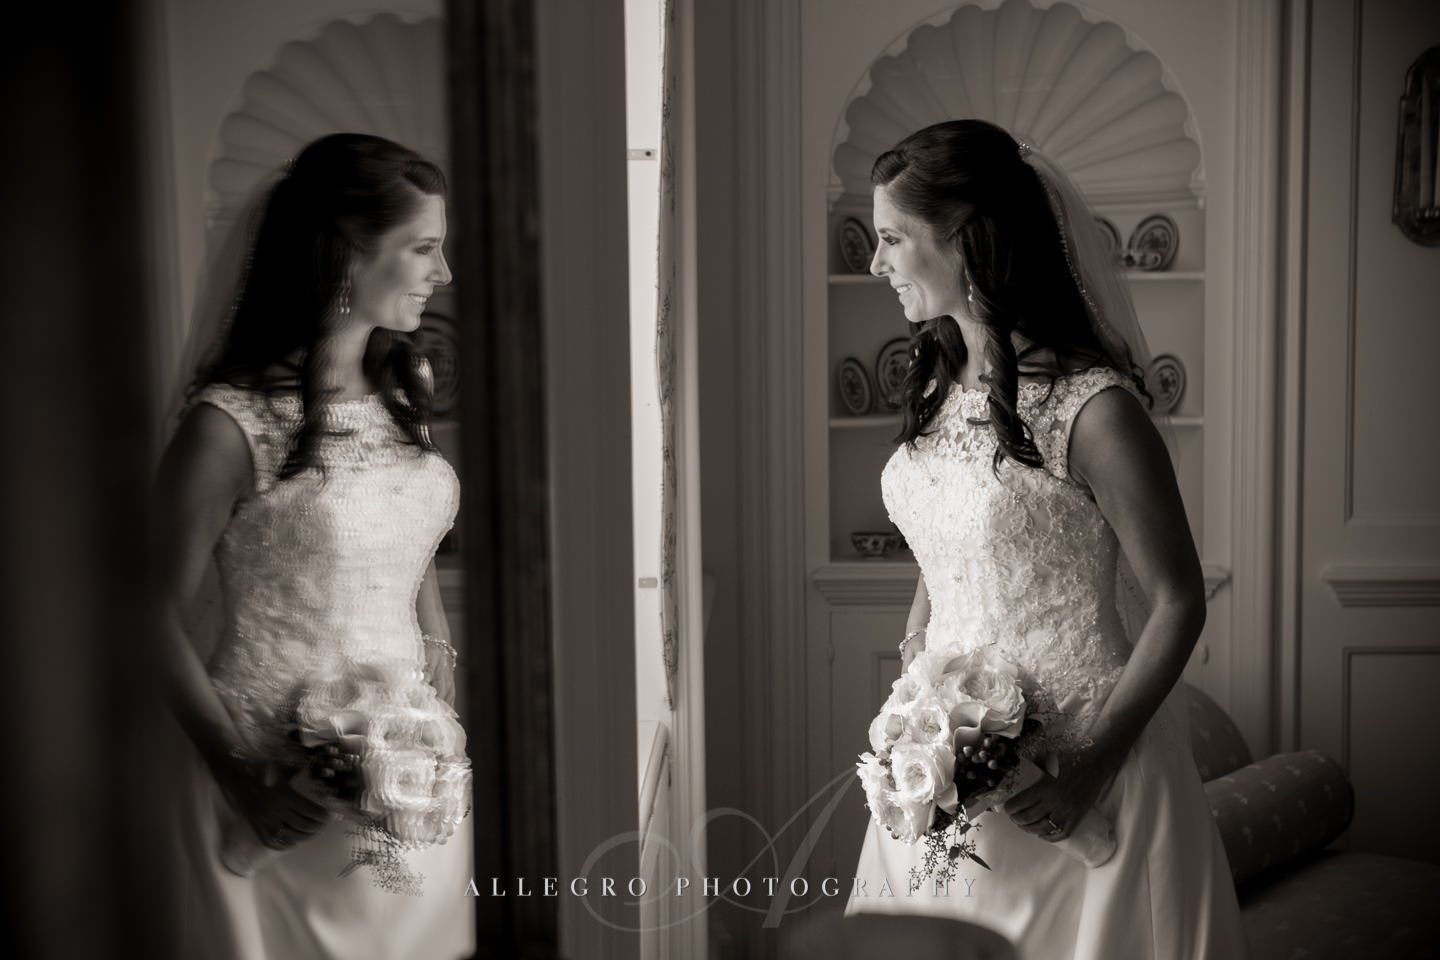 a portrait and a reflection of the bride- photo by Allegro Photography